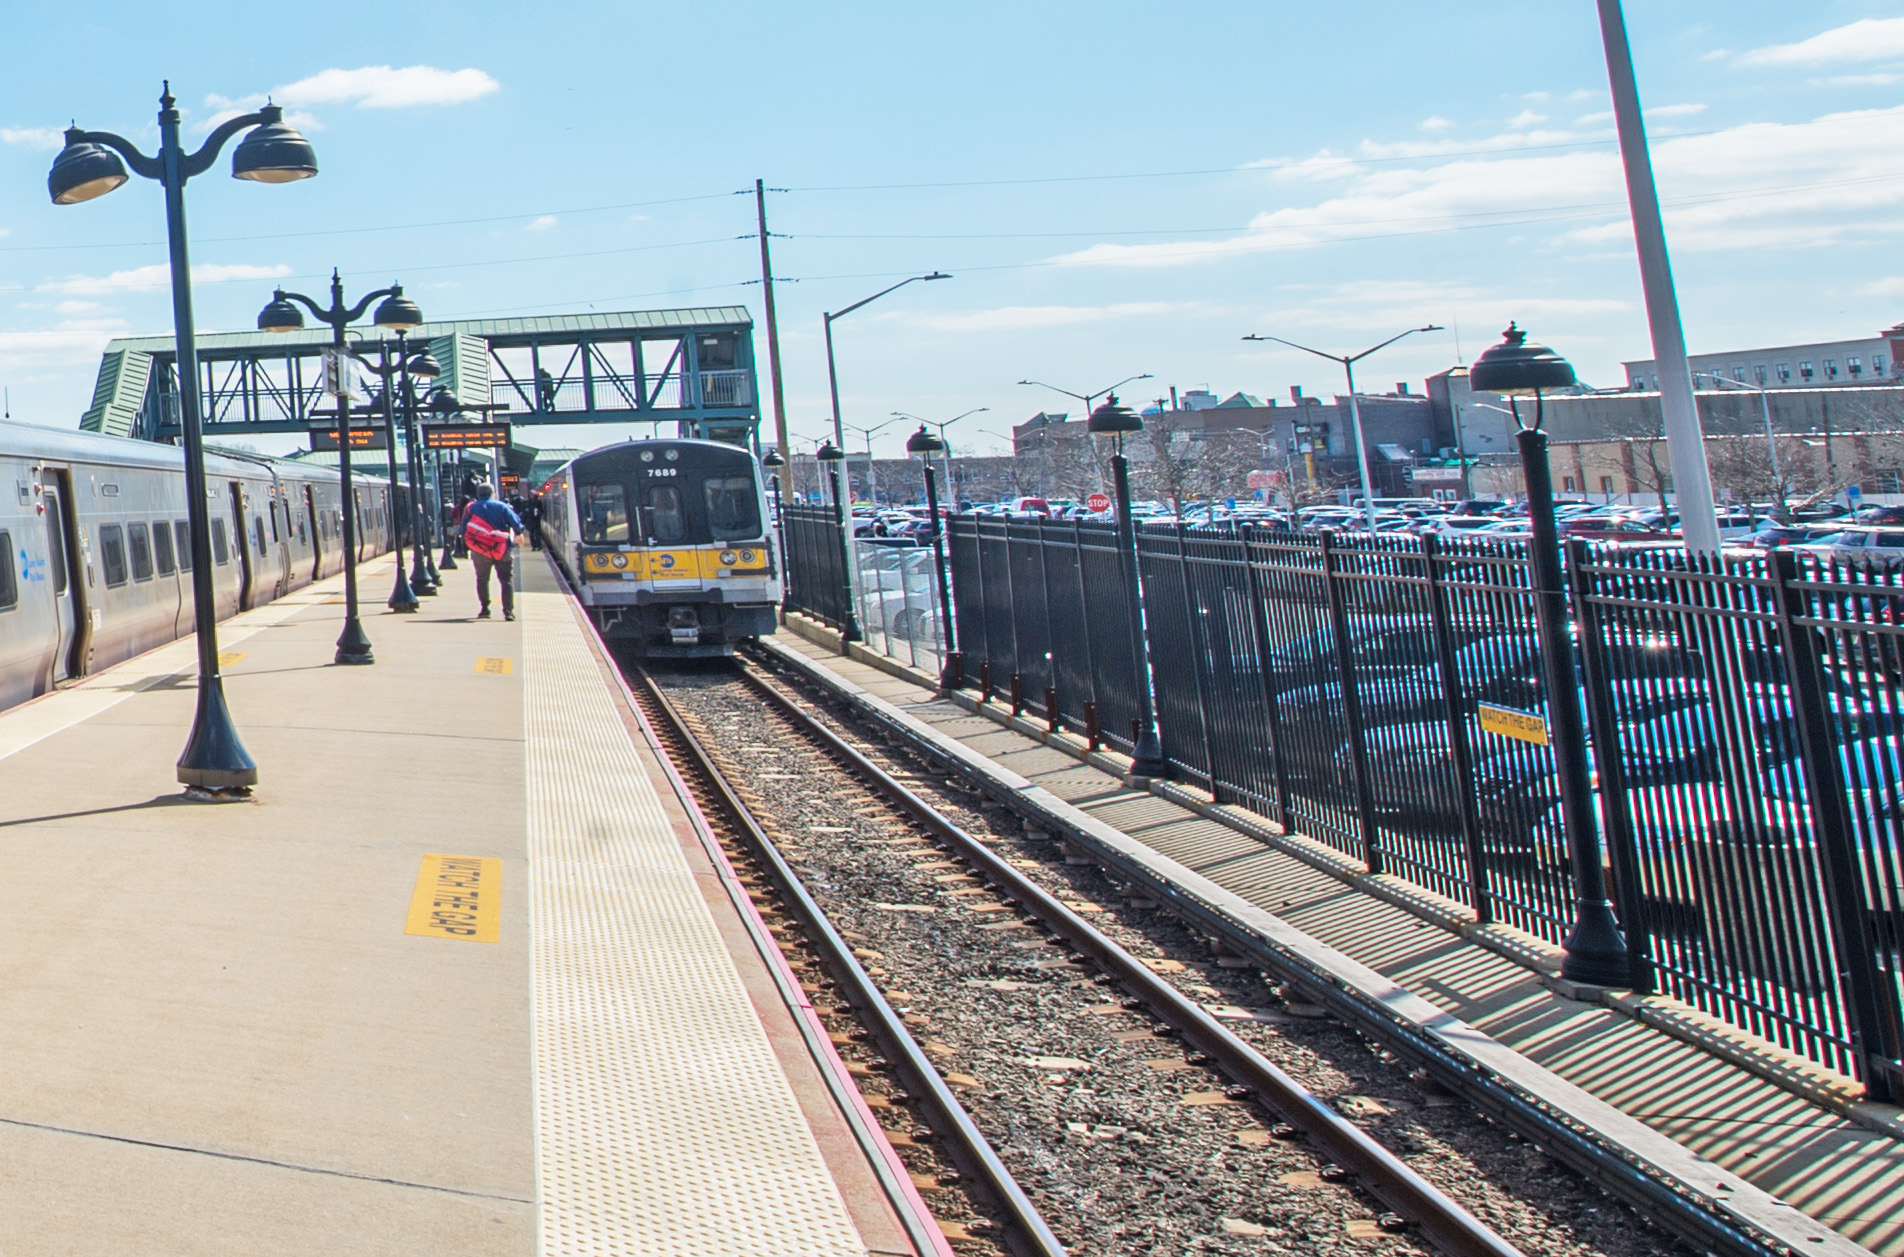 January 15-16: Buses Replace Trains Between Floral Park and Hempstead